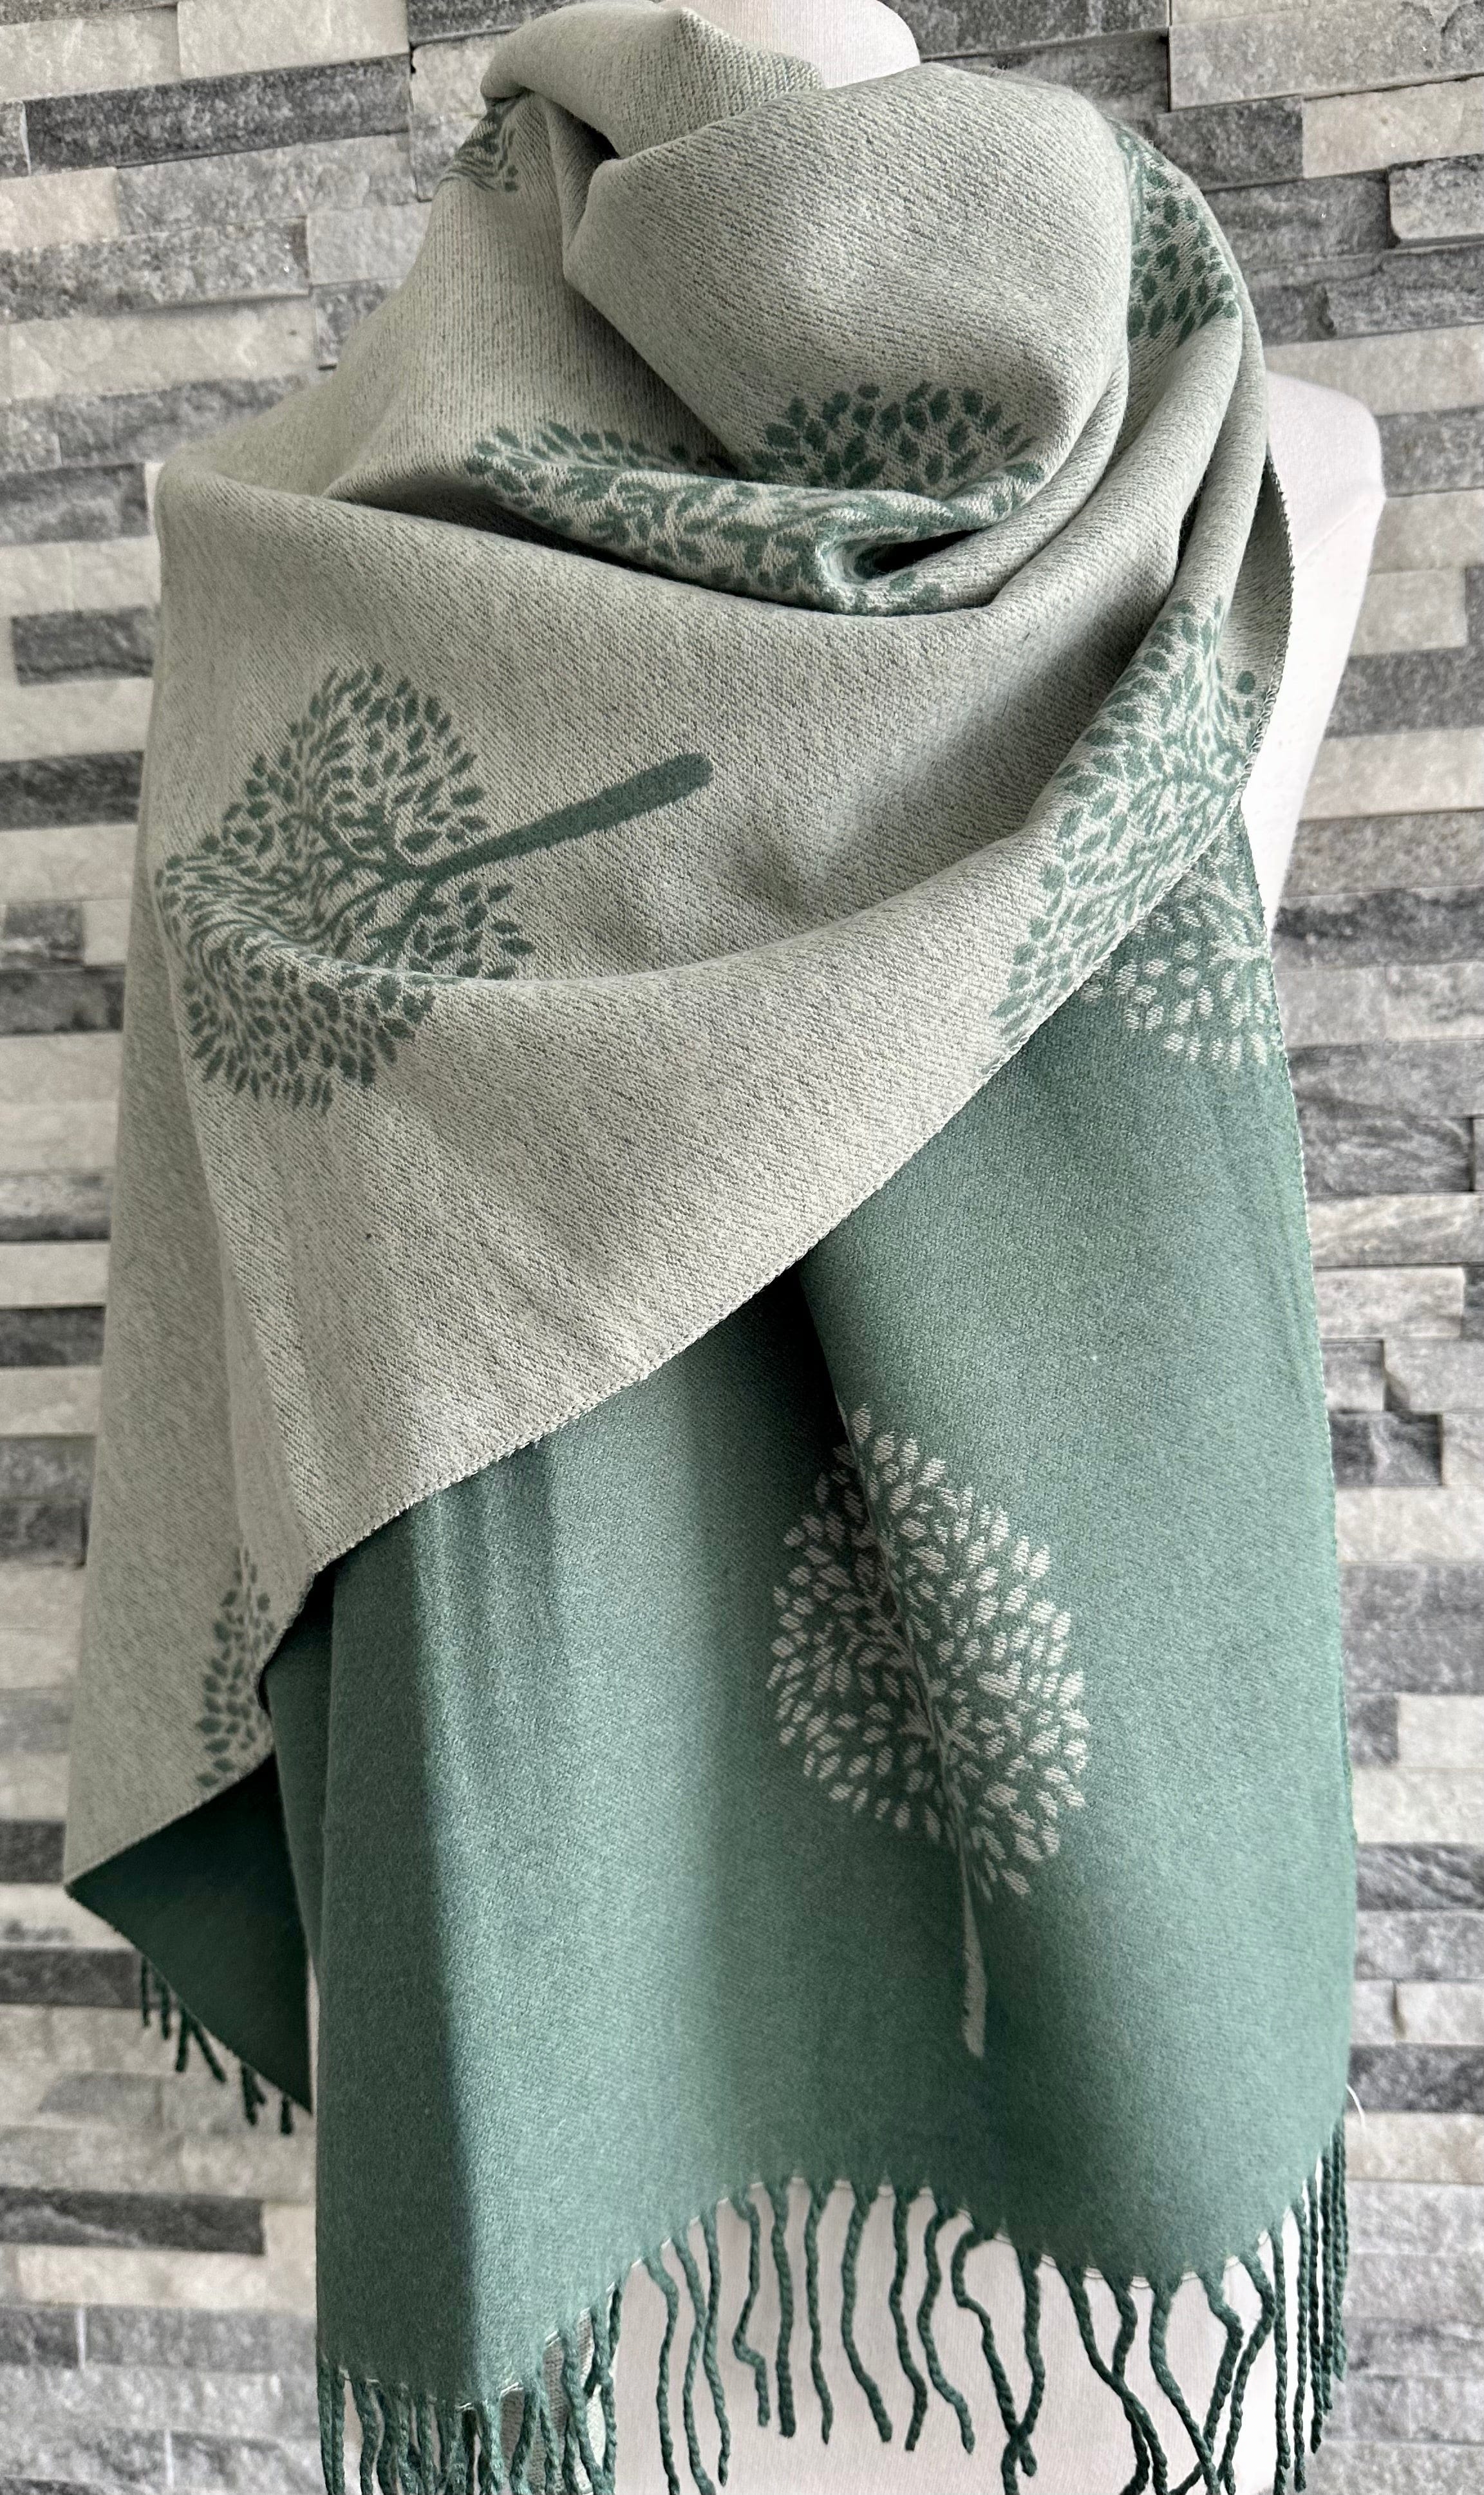 lusciousscarves Sage Green and Grey Reversible Mulberry Tree Scarf / Wrap, Cashmere blend